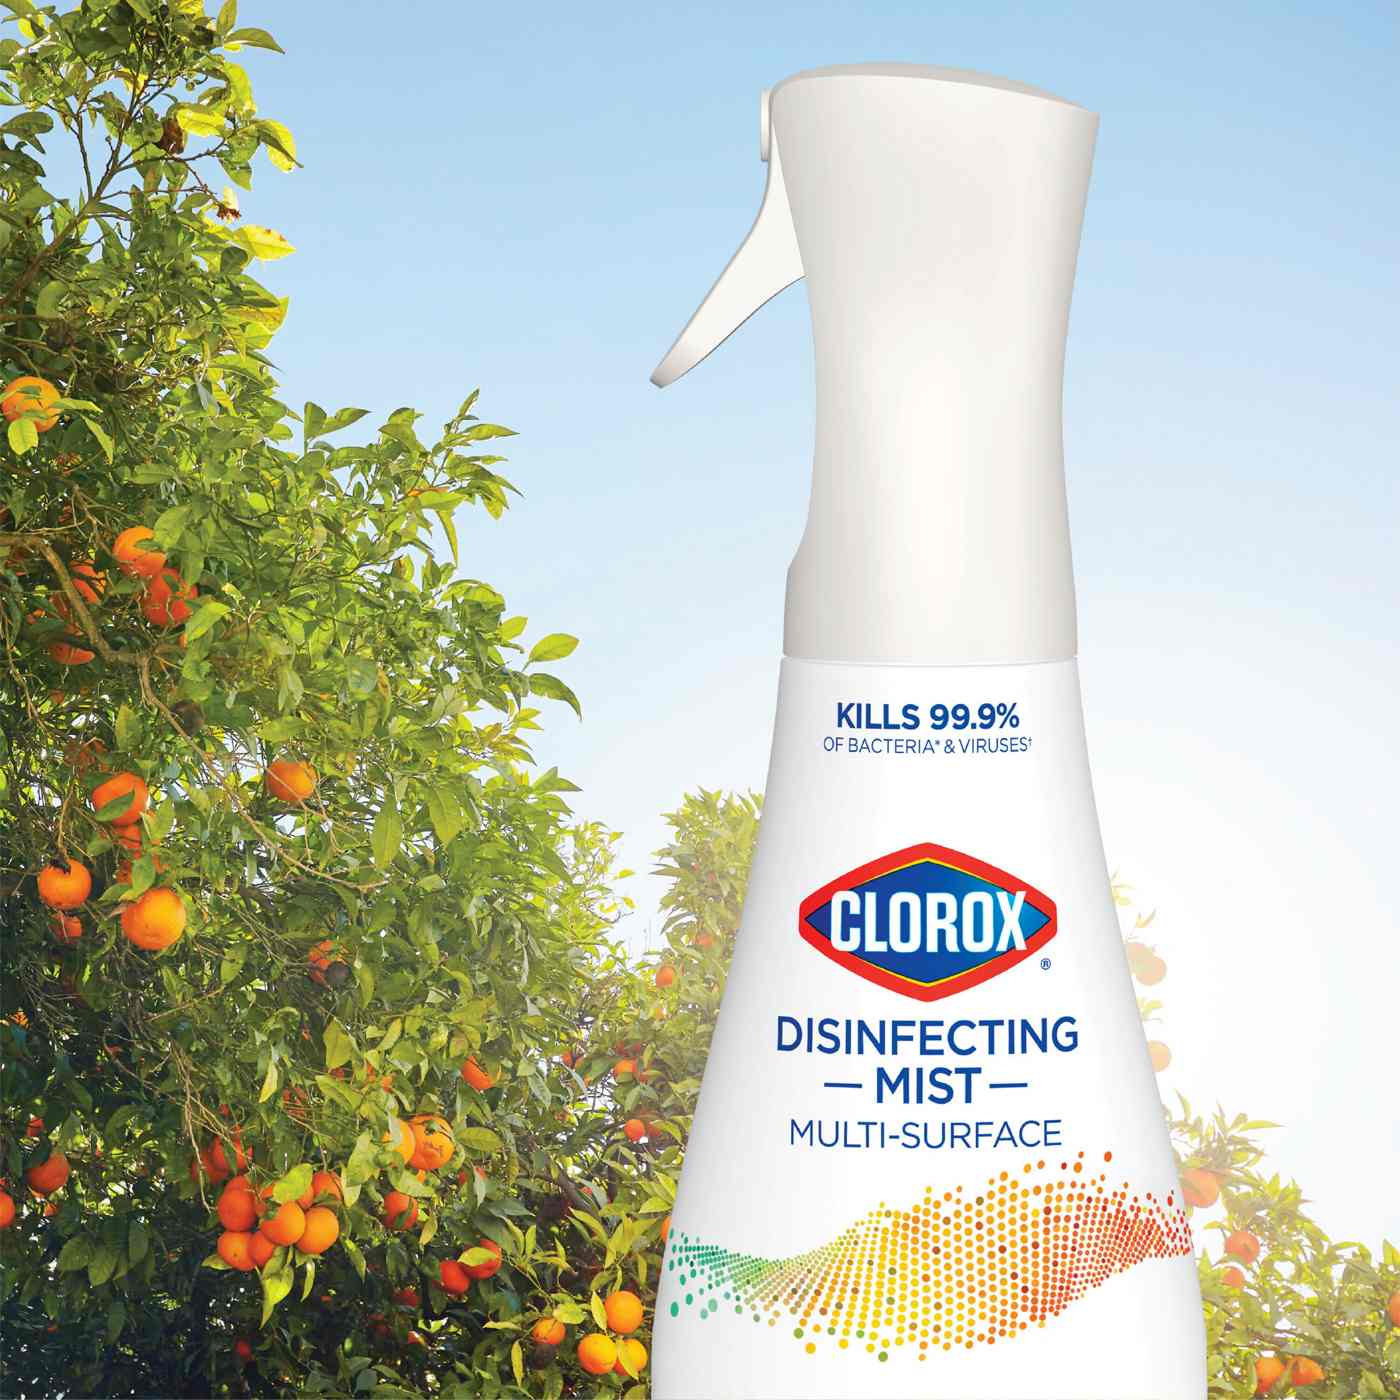 Clorox Eucalyptus Peppermint Multi-Surface Disinfecting Mist; image 13 of 19